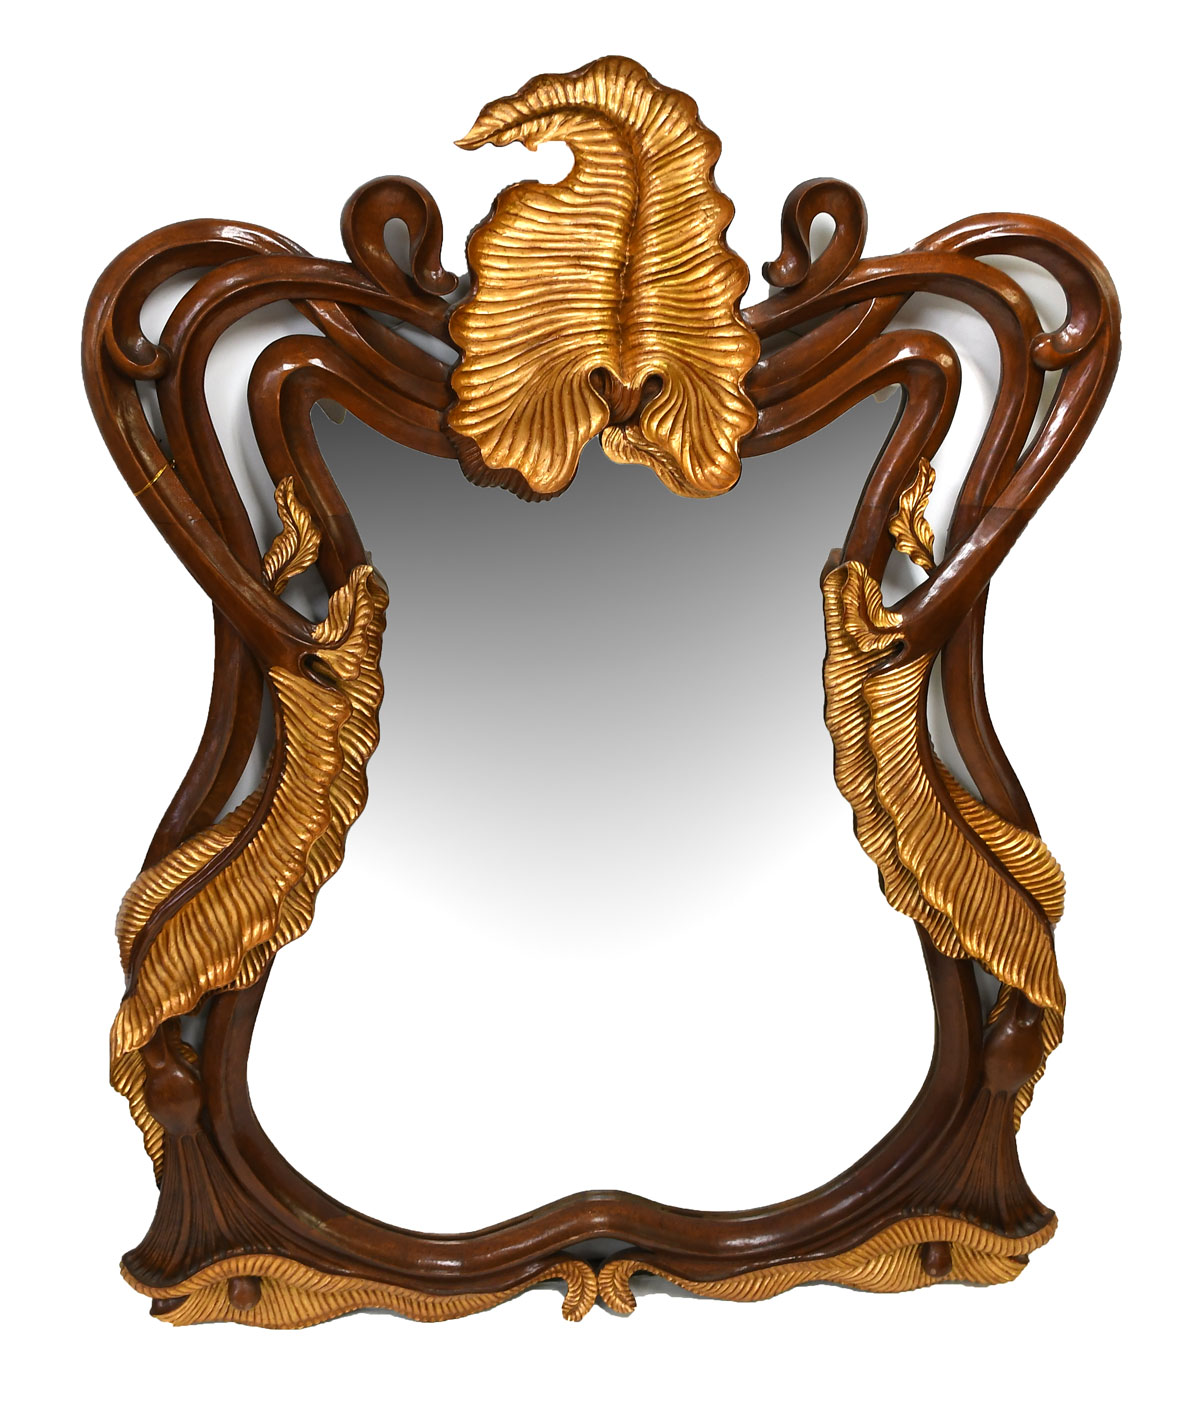 LARGE CARVED GILT ALOCASIA MIRROR  274a0b